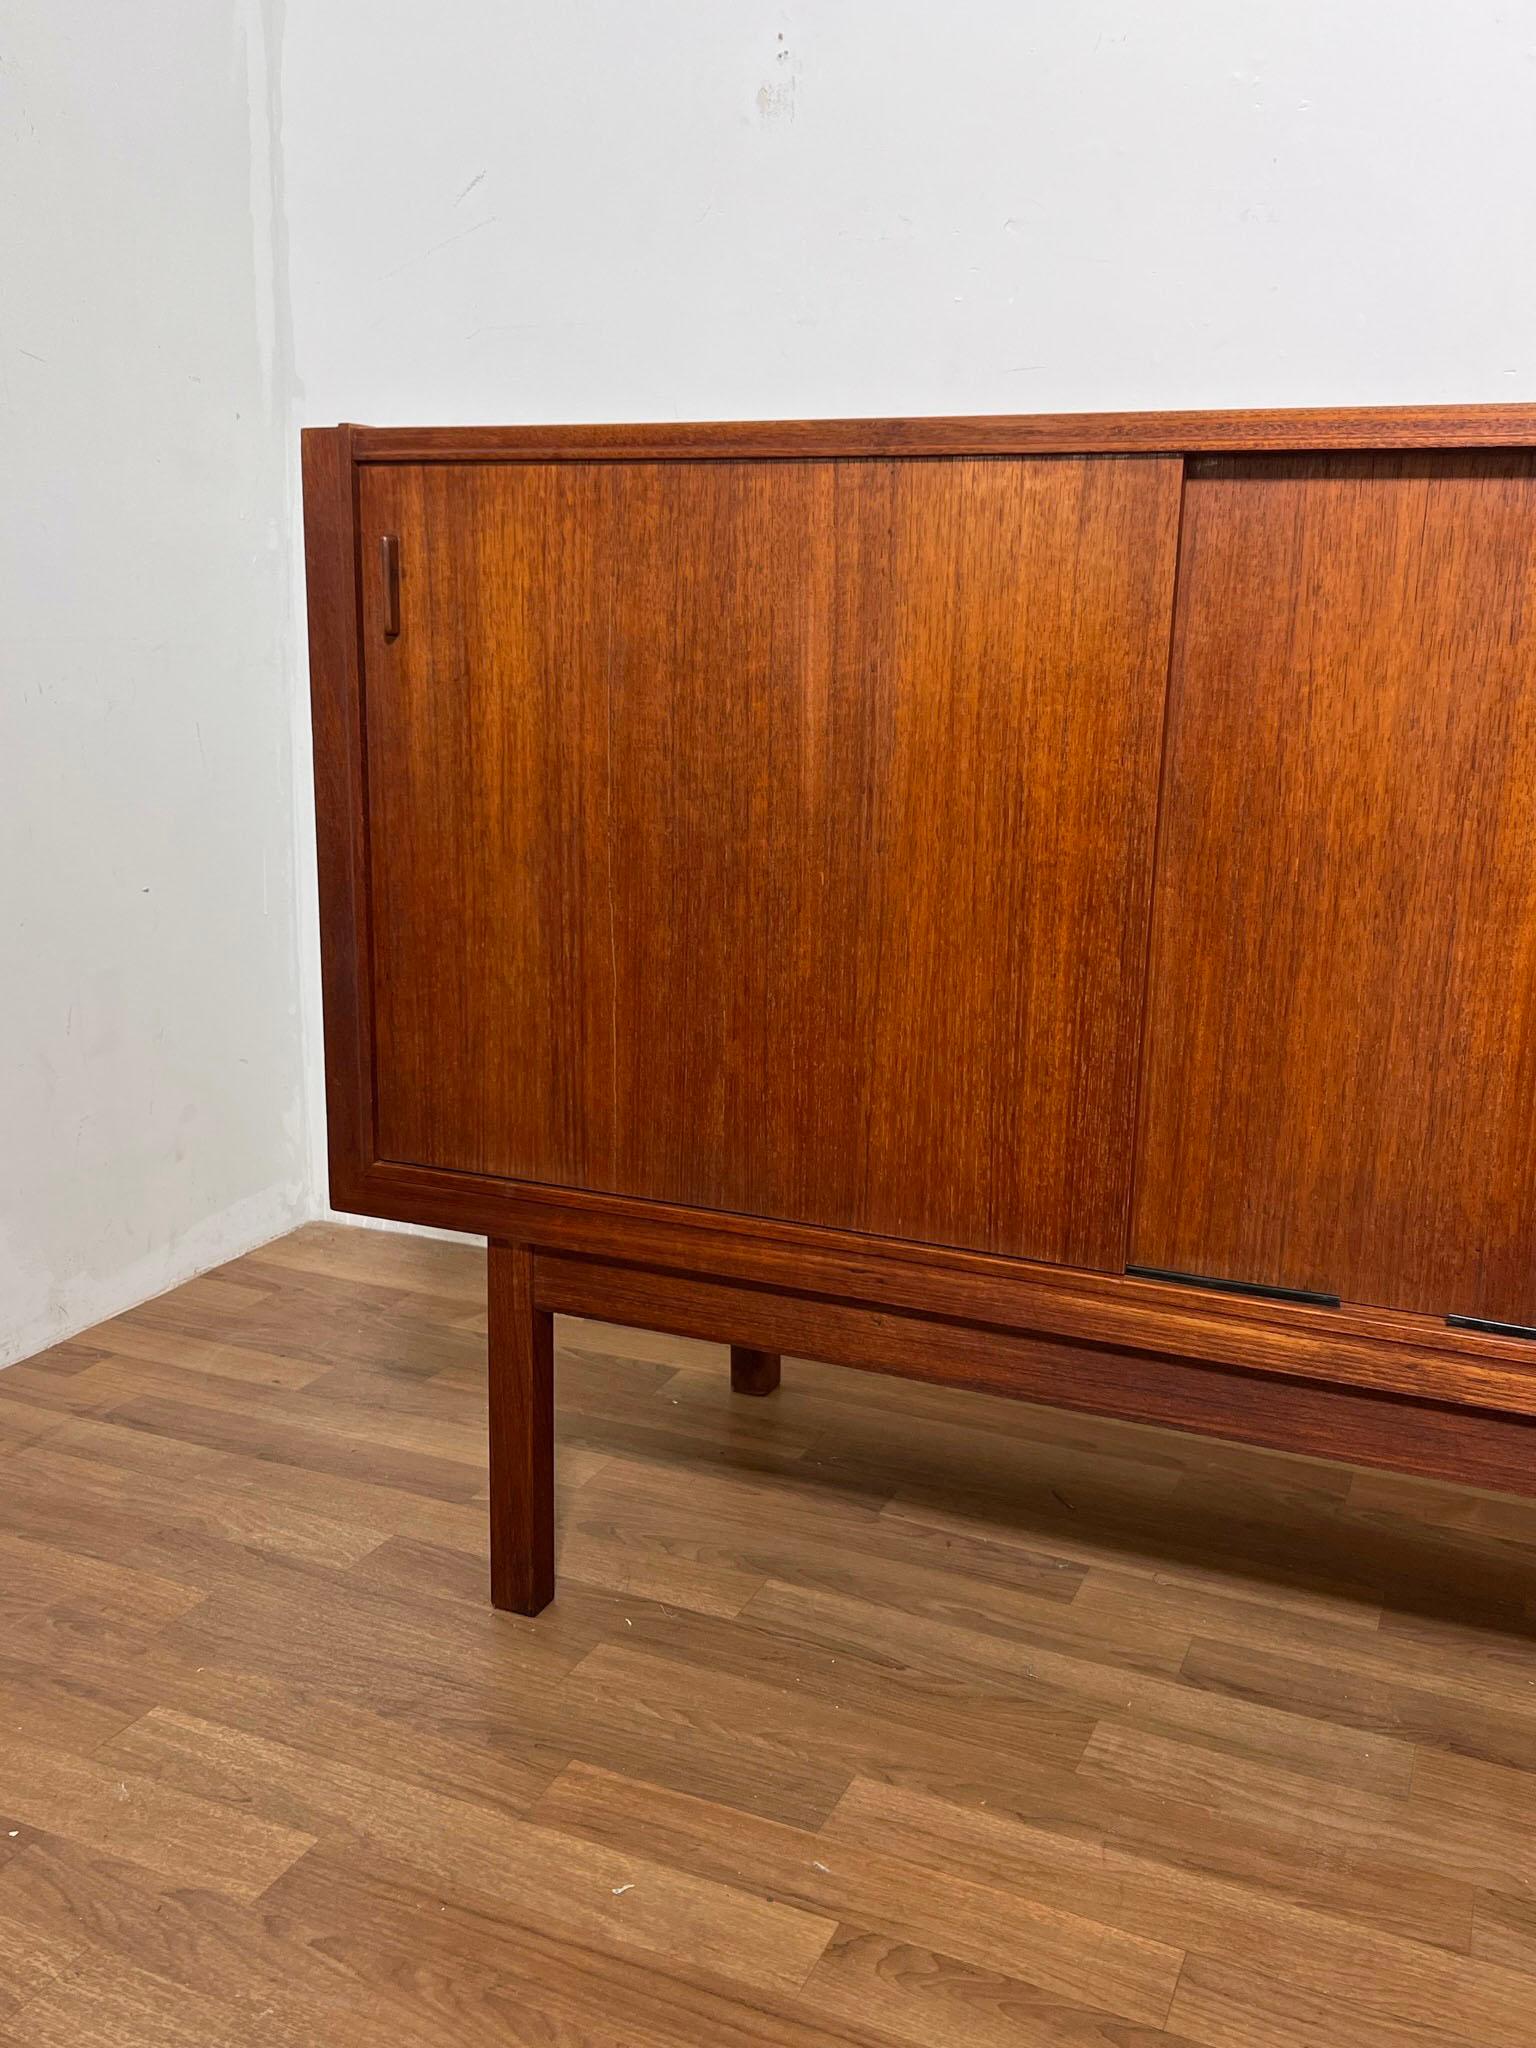 Large 7.25 foot long Danish teak credenza featuring four sliding doors, with adjustable shelving and shallow felt-lined drawers. Marked made in Denmark, in the style of Ib Kofod-Larsen.